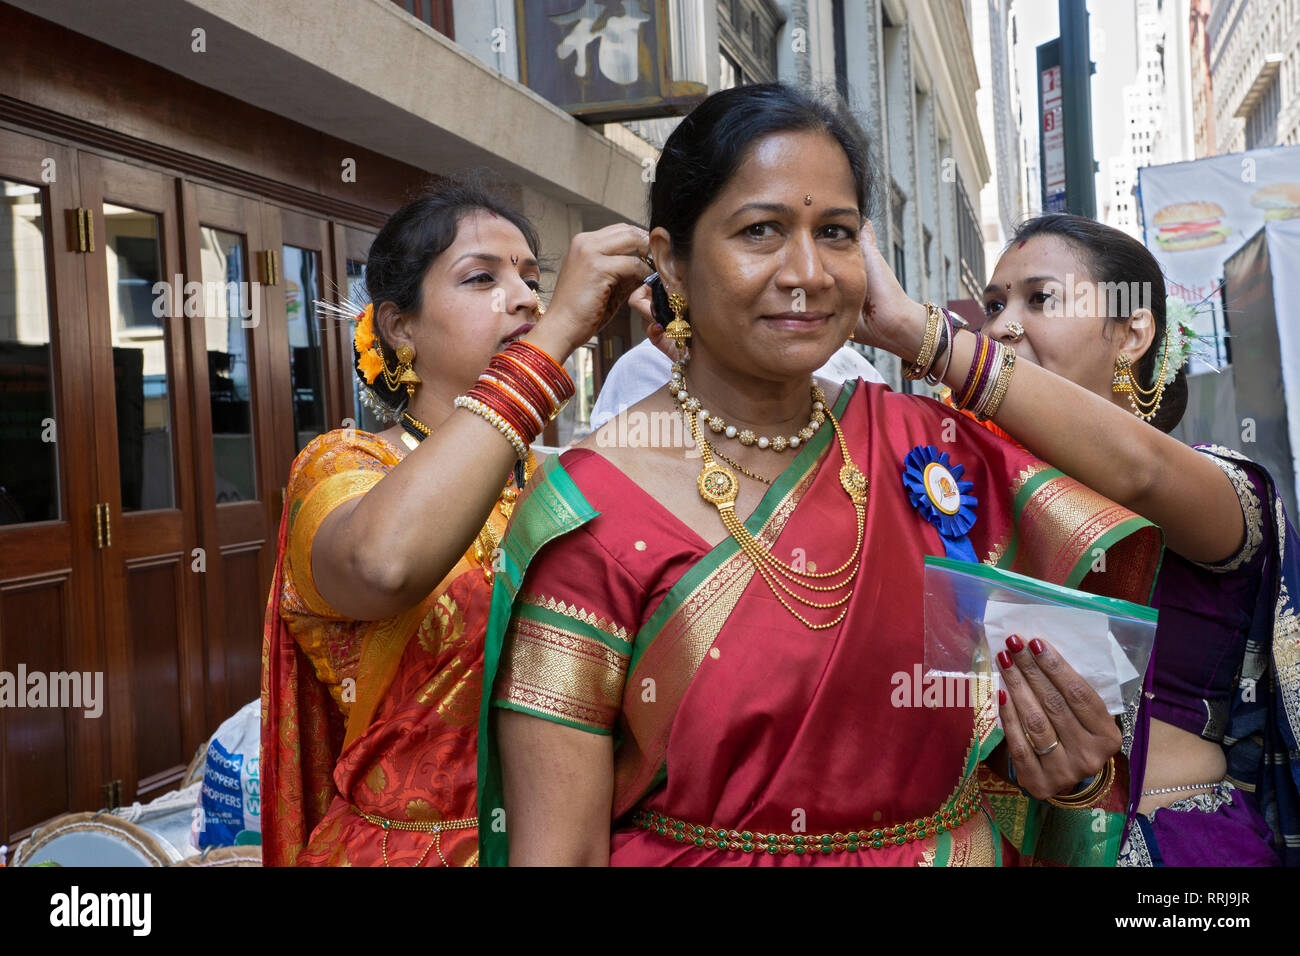 An Indian woman has her hair and jewelry adjusted by two friends just prior to the India Day Parade in Manhattan, New York City. Stock Photo